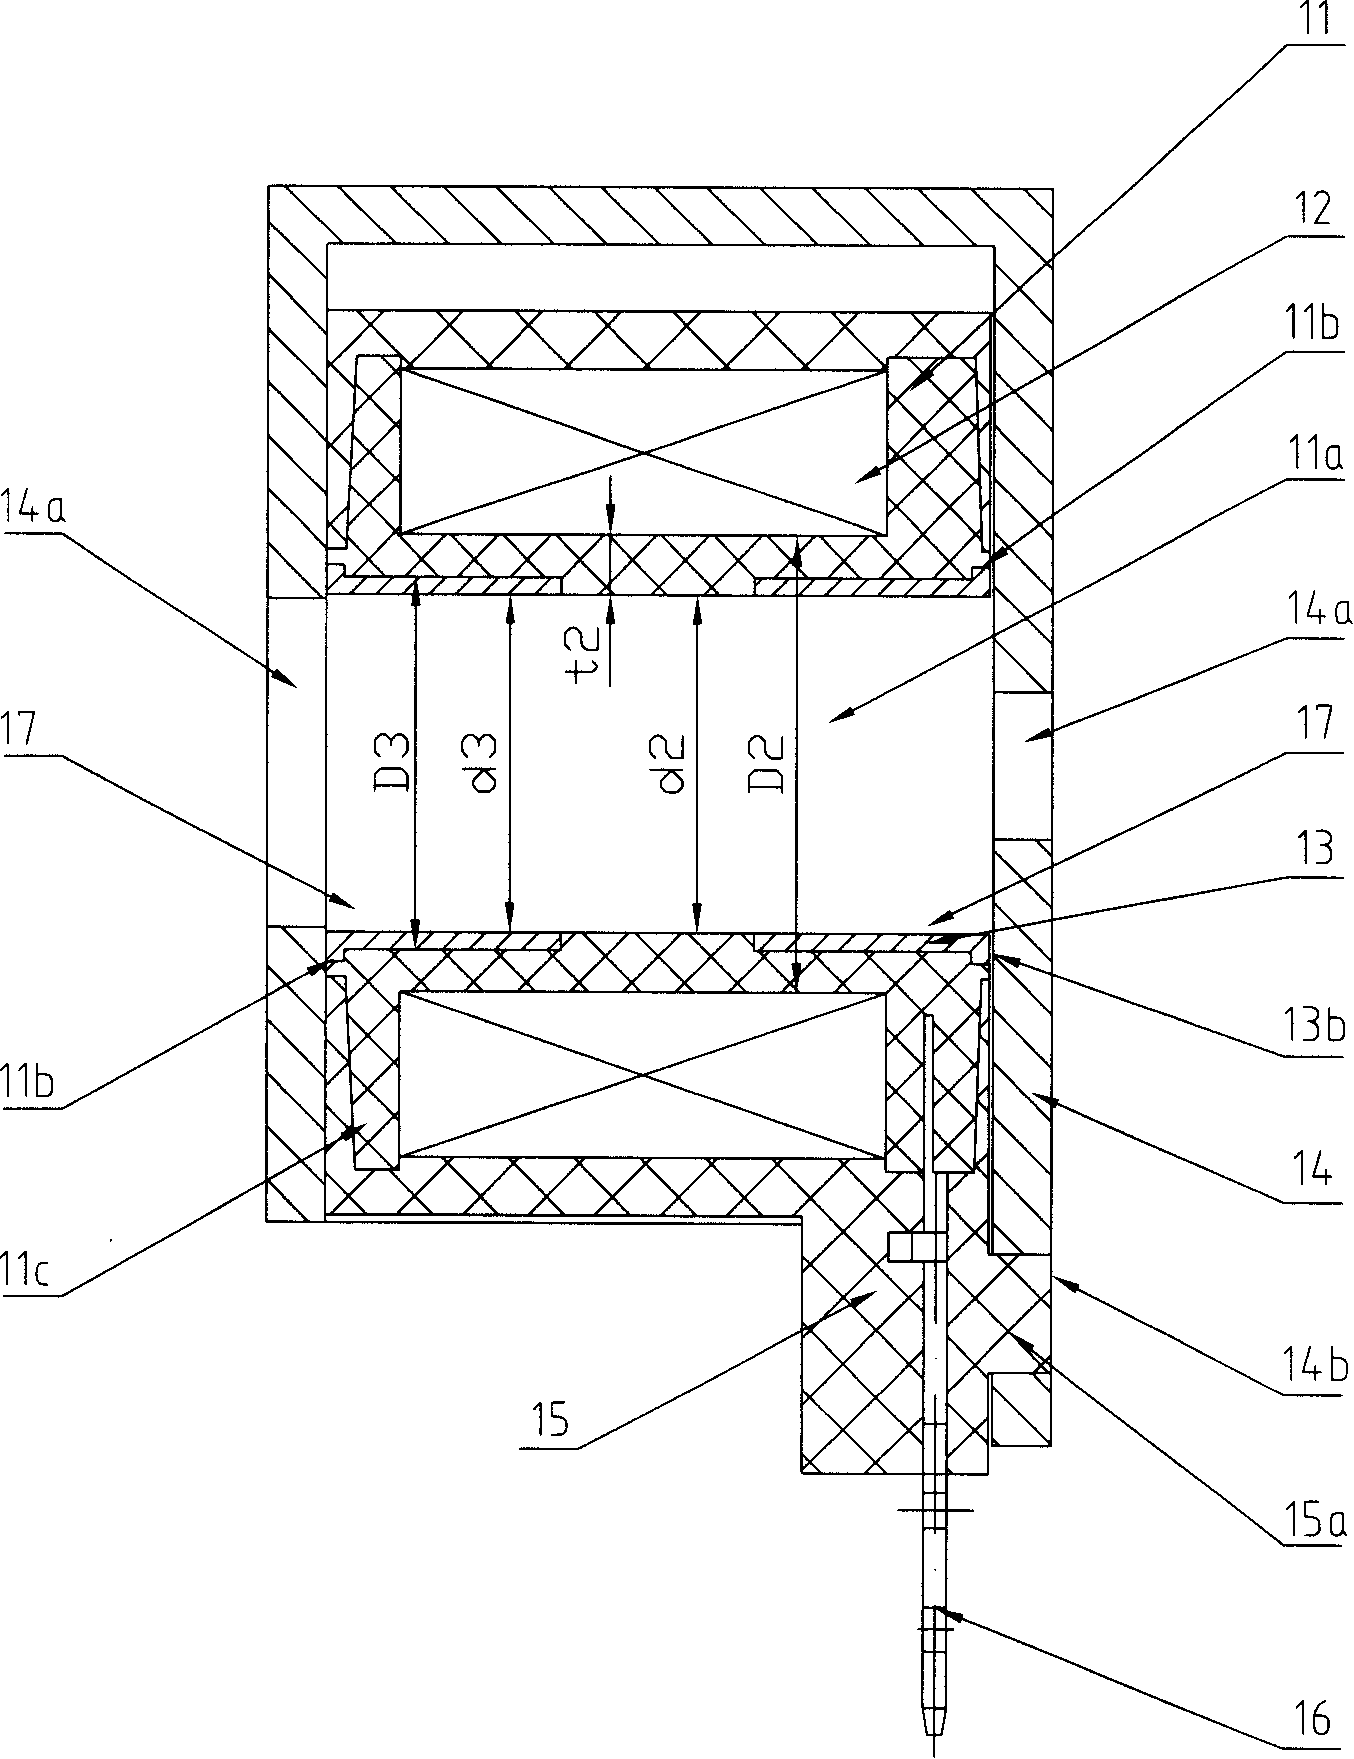 Electromagnetic coil for solenoid valve